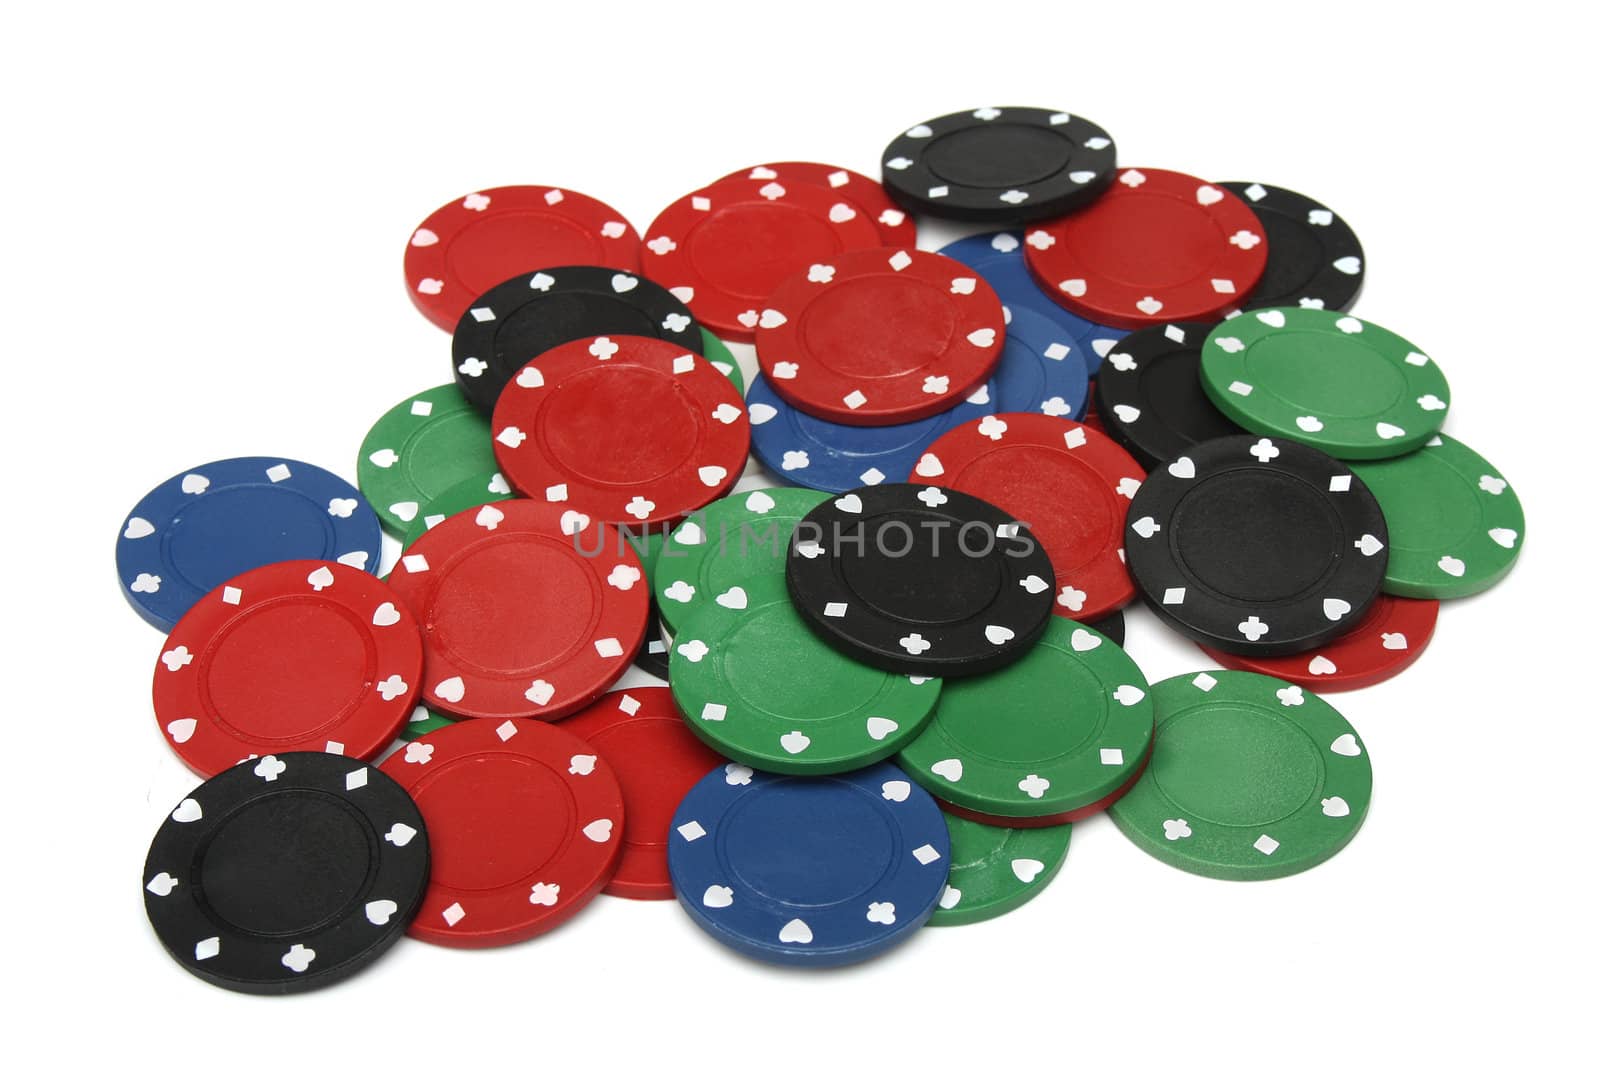 Lots of gambling chips over white backgroung